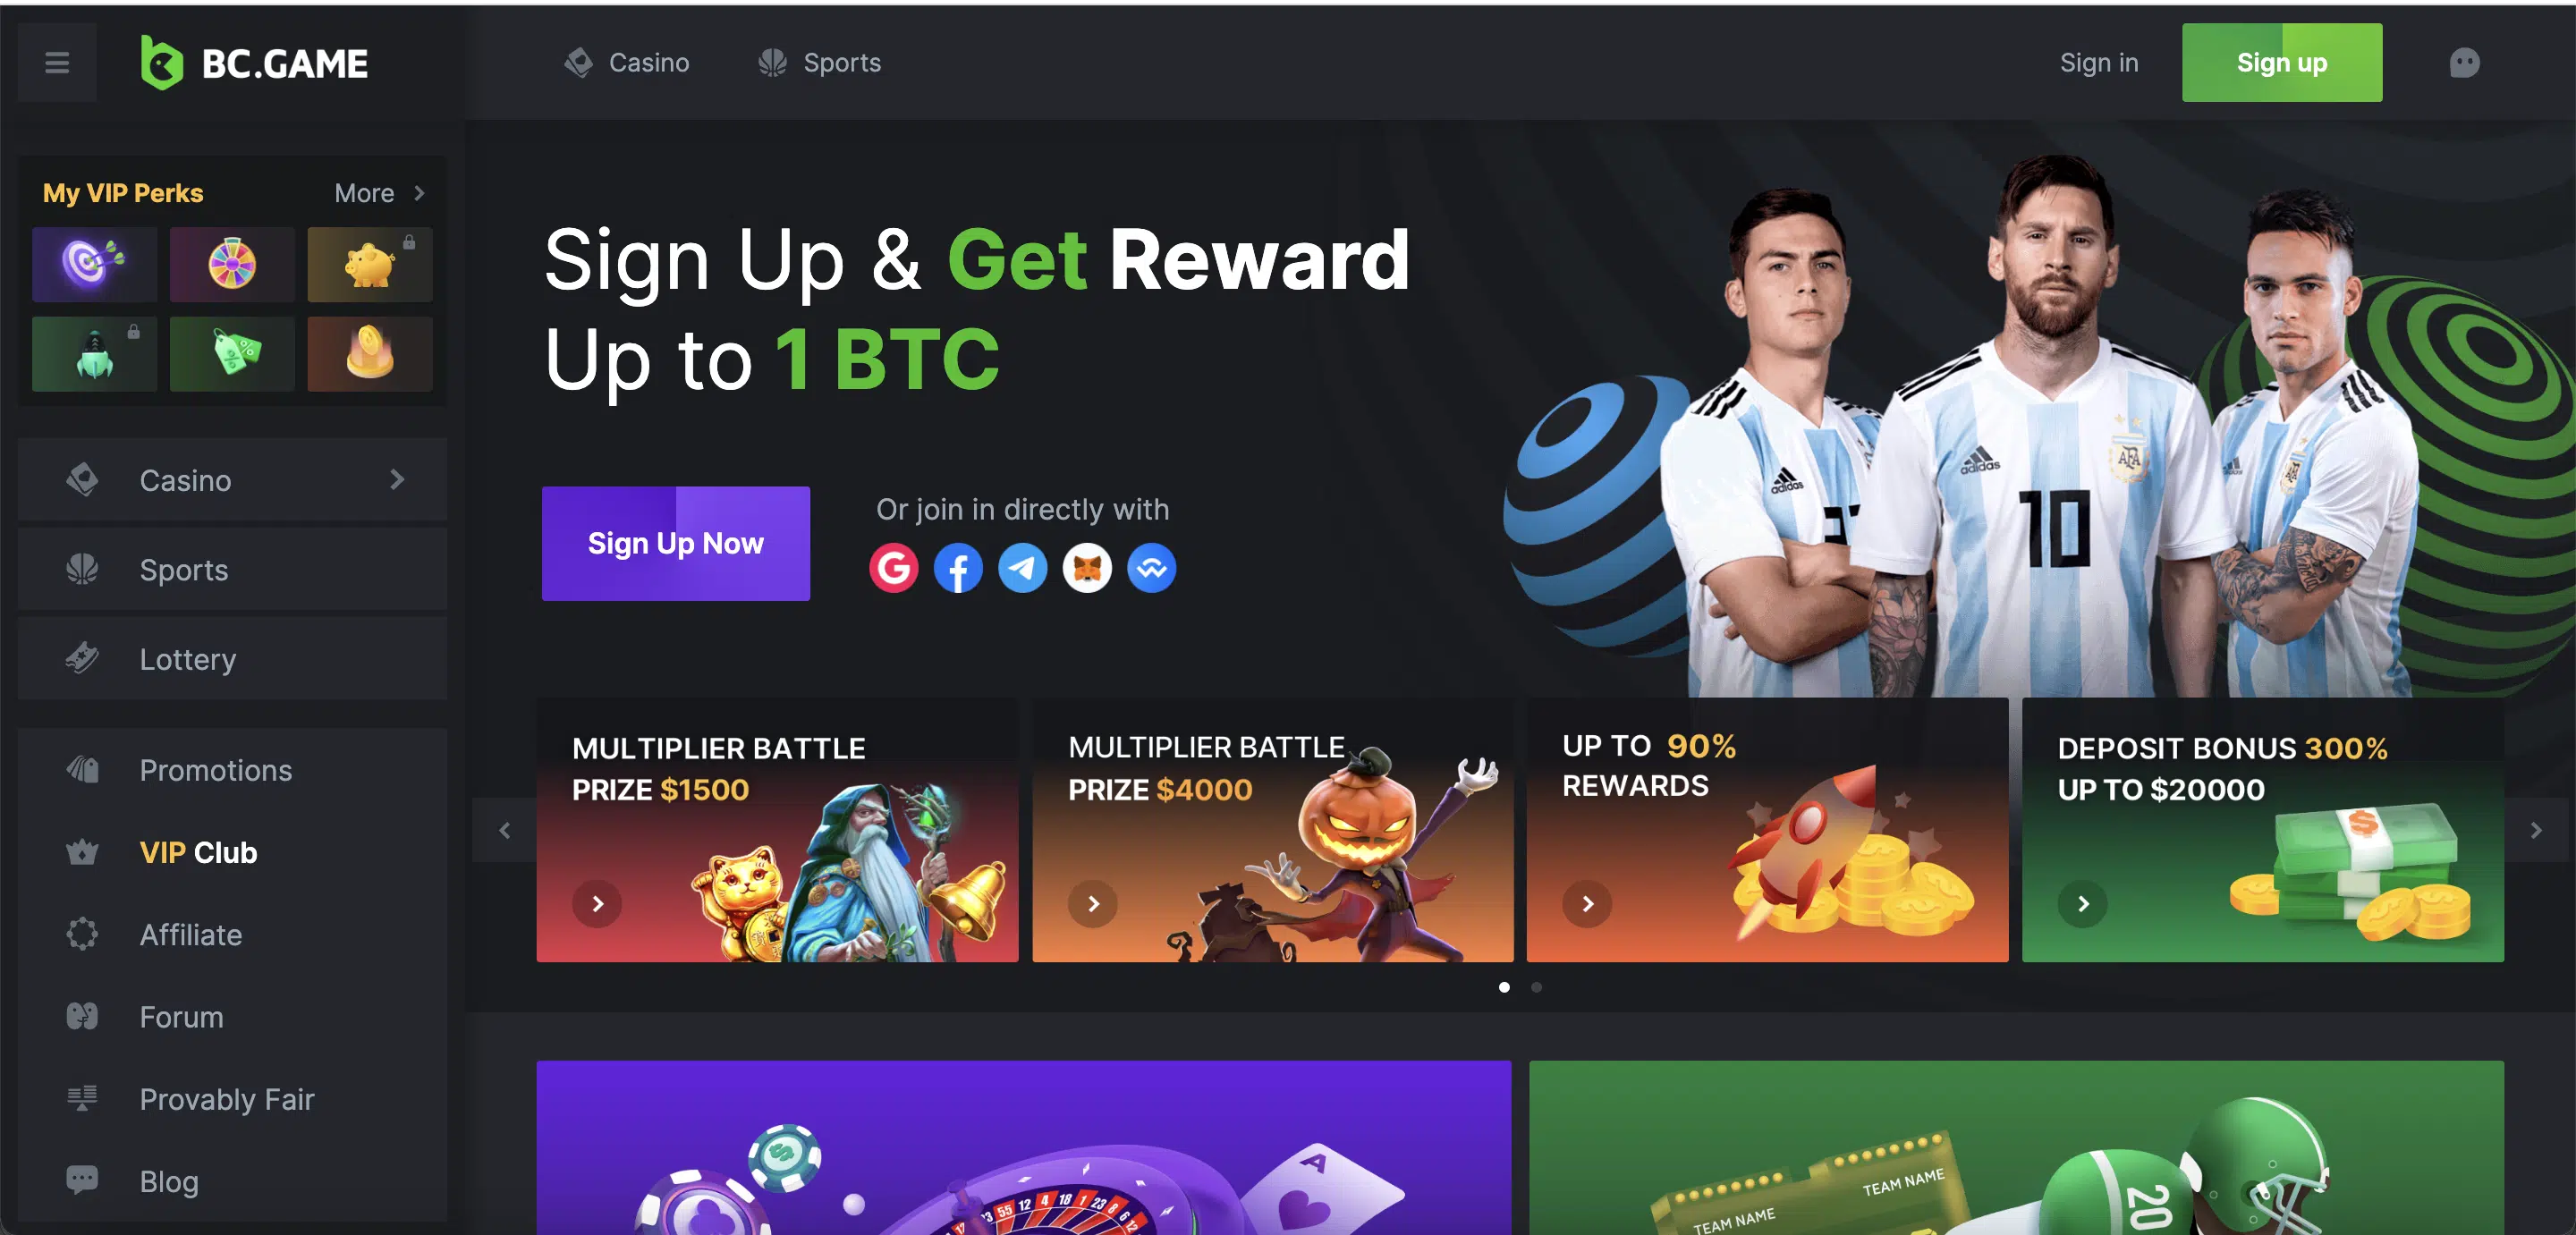 Now You Can Buy An App That is Really Made For top crypto casinos